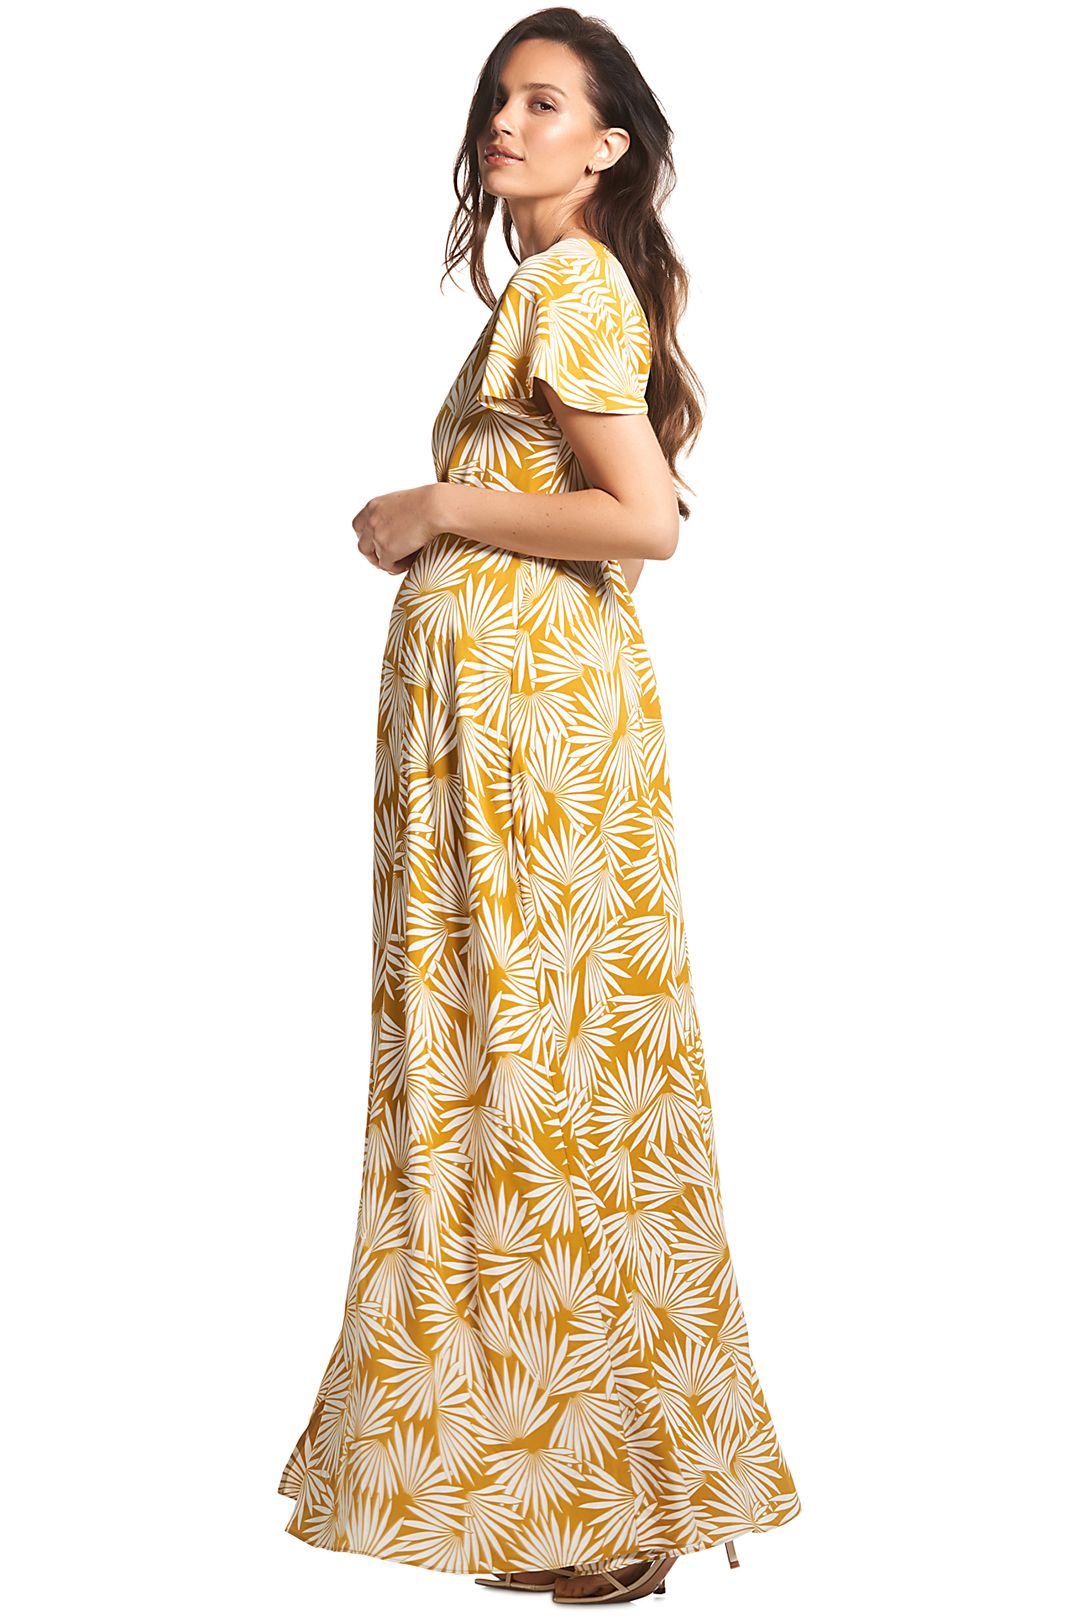 Elizabeth Maxi Dress in Yellow Sun Print by Soon Maternity for Hire